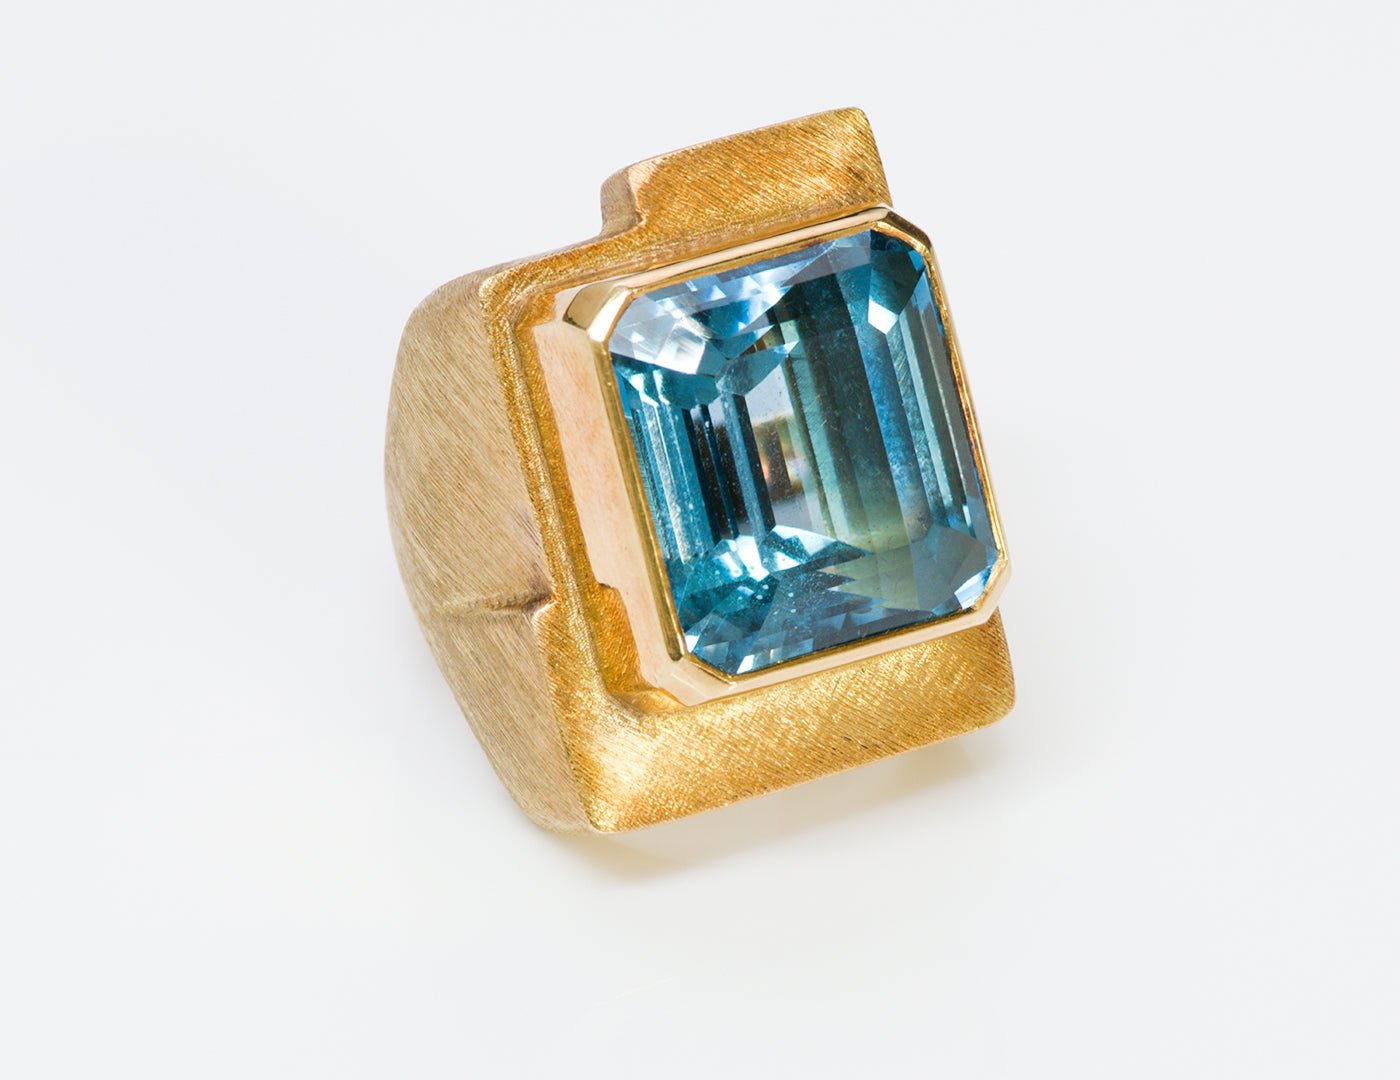 Burle Marx Blue Topaz 18K Gold Ring - DSF Antique Jewelry